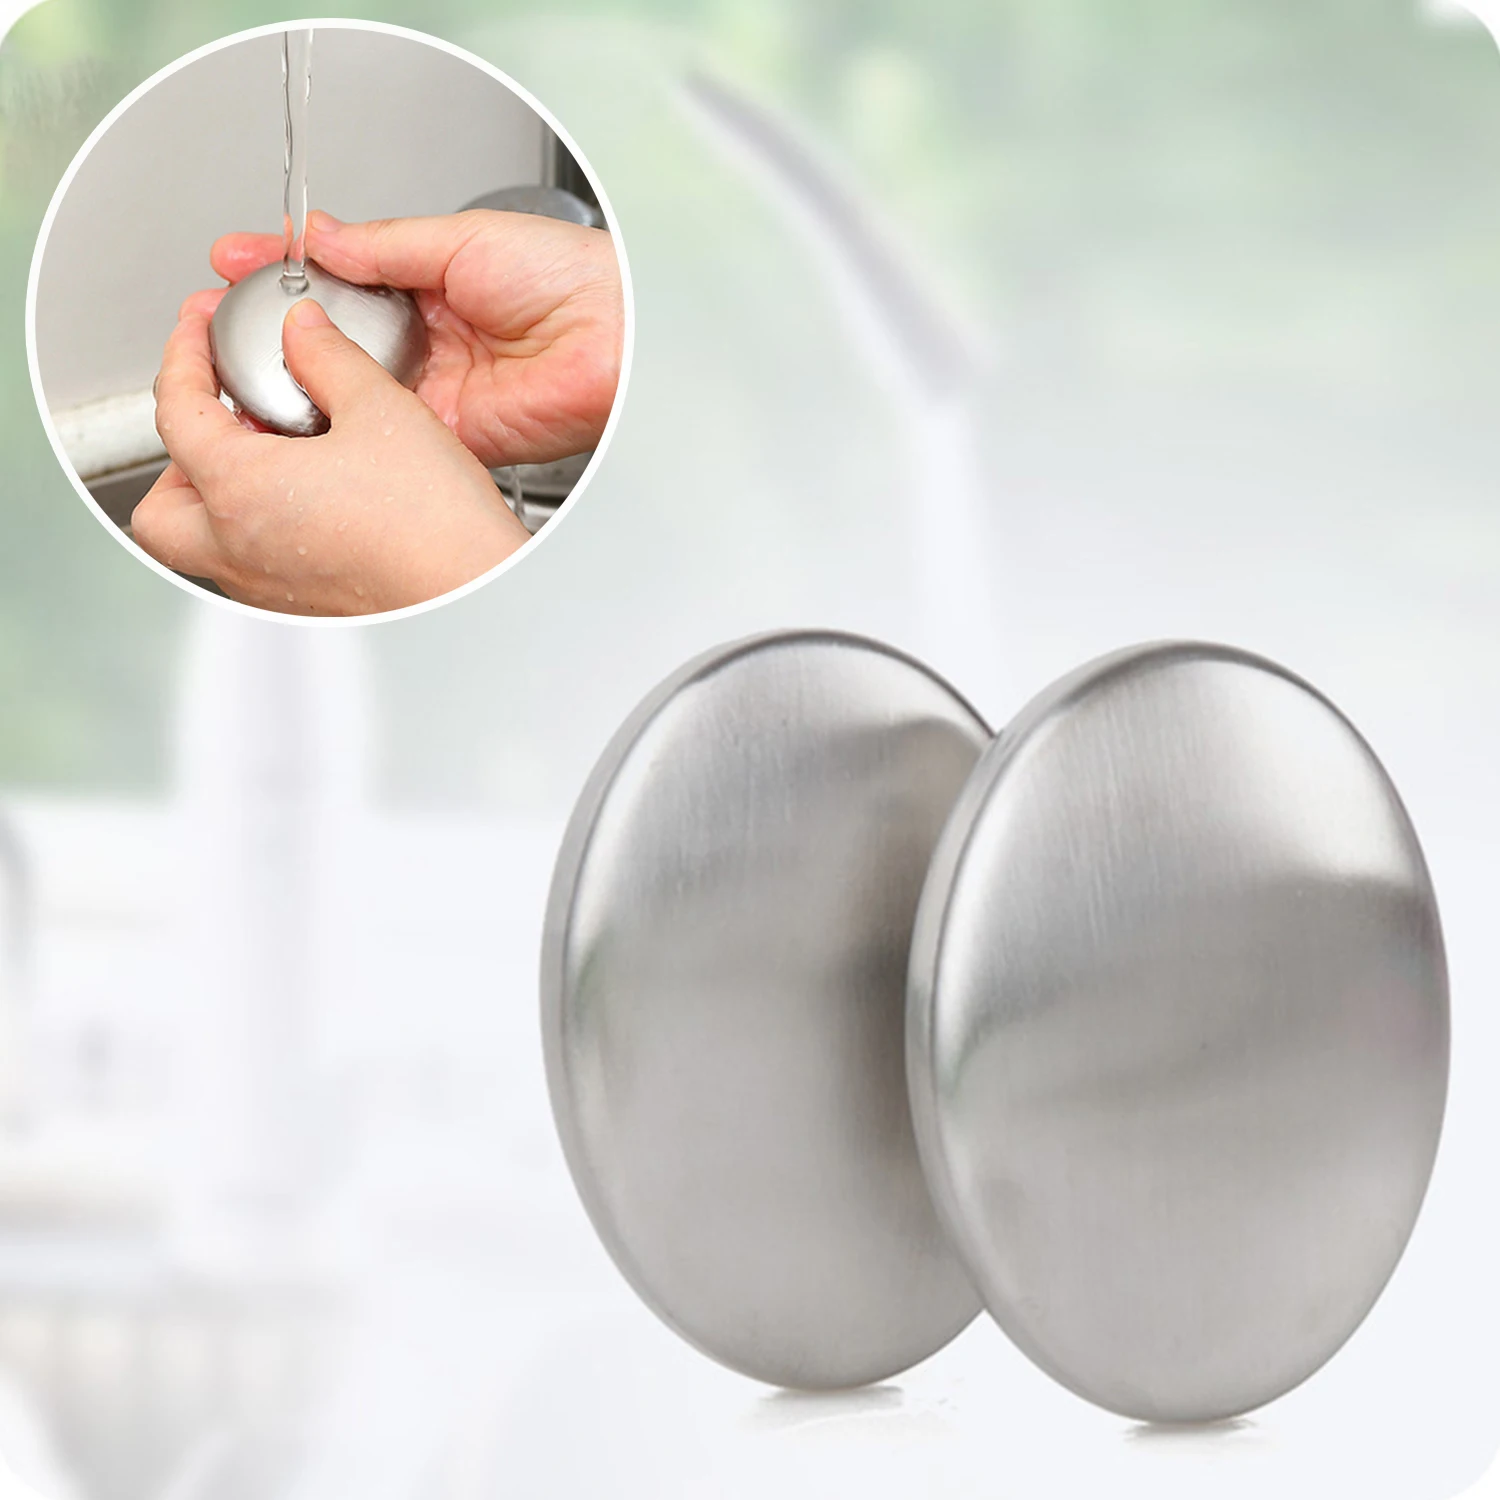 

Stainless Steel Soap Shape Deodorize Smell From Hands Retail Eliminating Kitchen Bar Bathroom Soap Useful Tools Smell Soap Bar